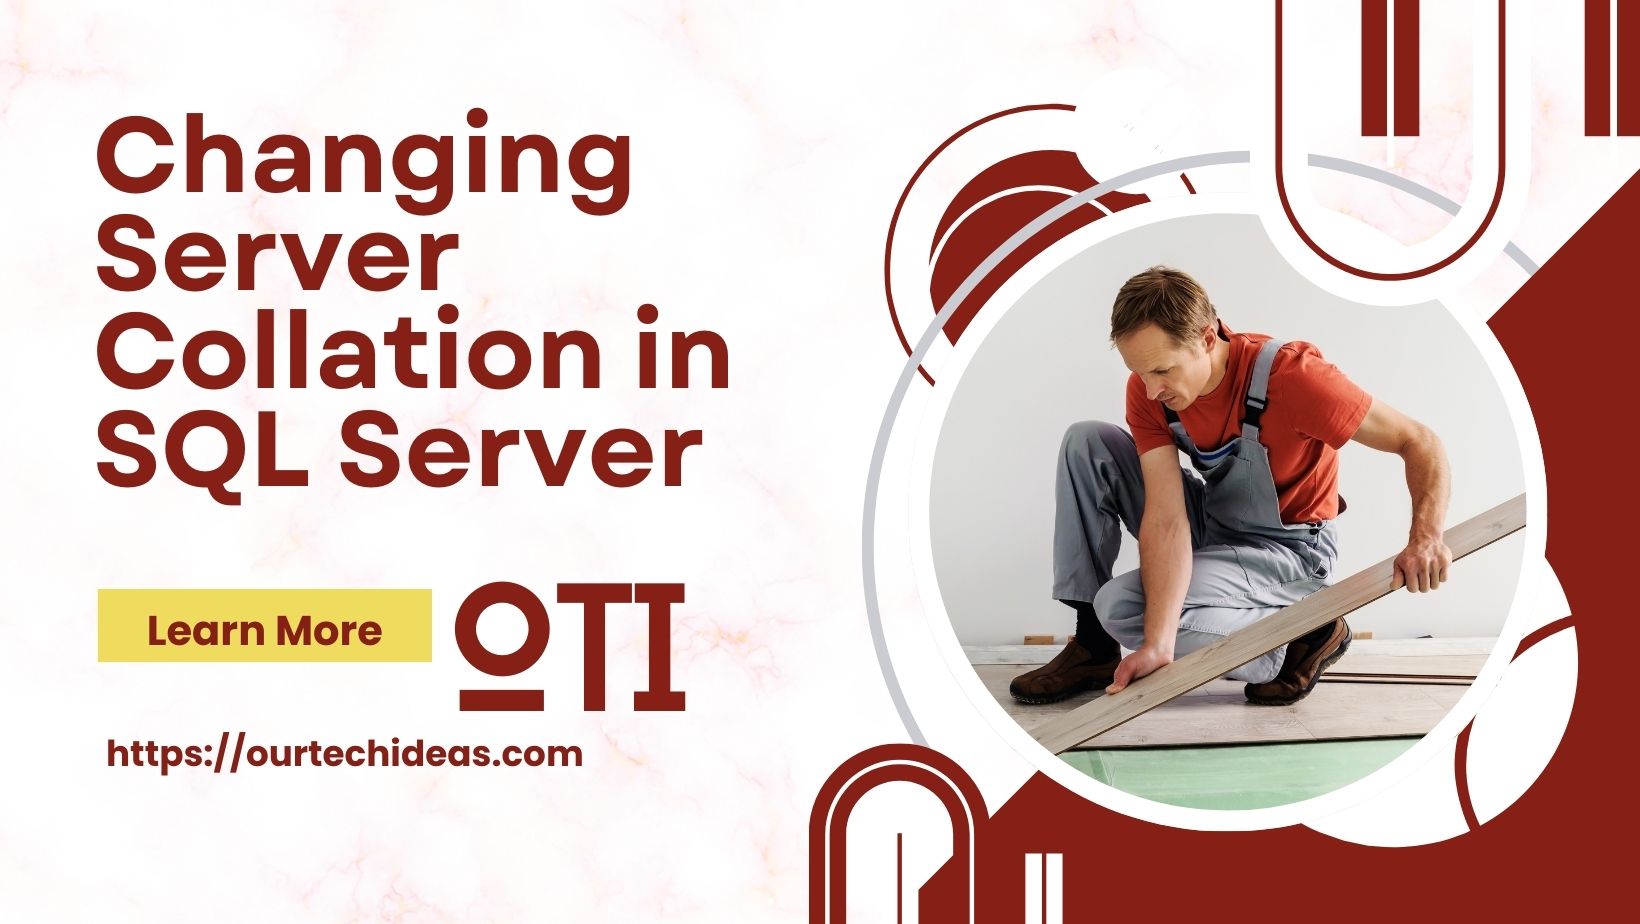 Changing Server Collation in SQL Server: A Step-by-Step Guide